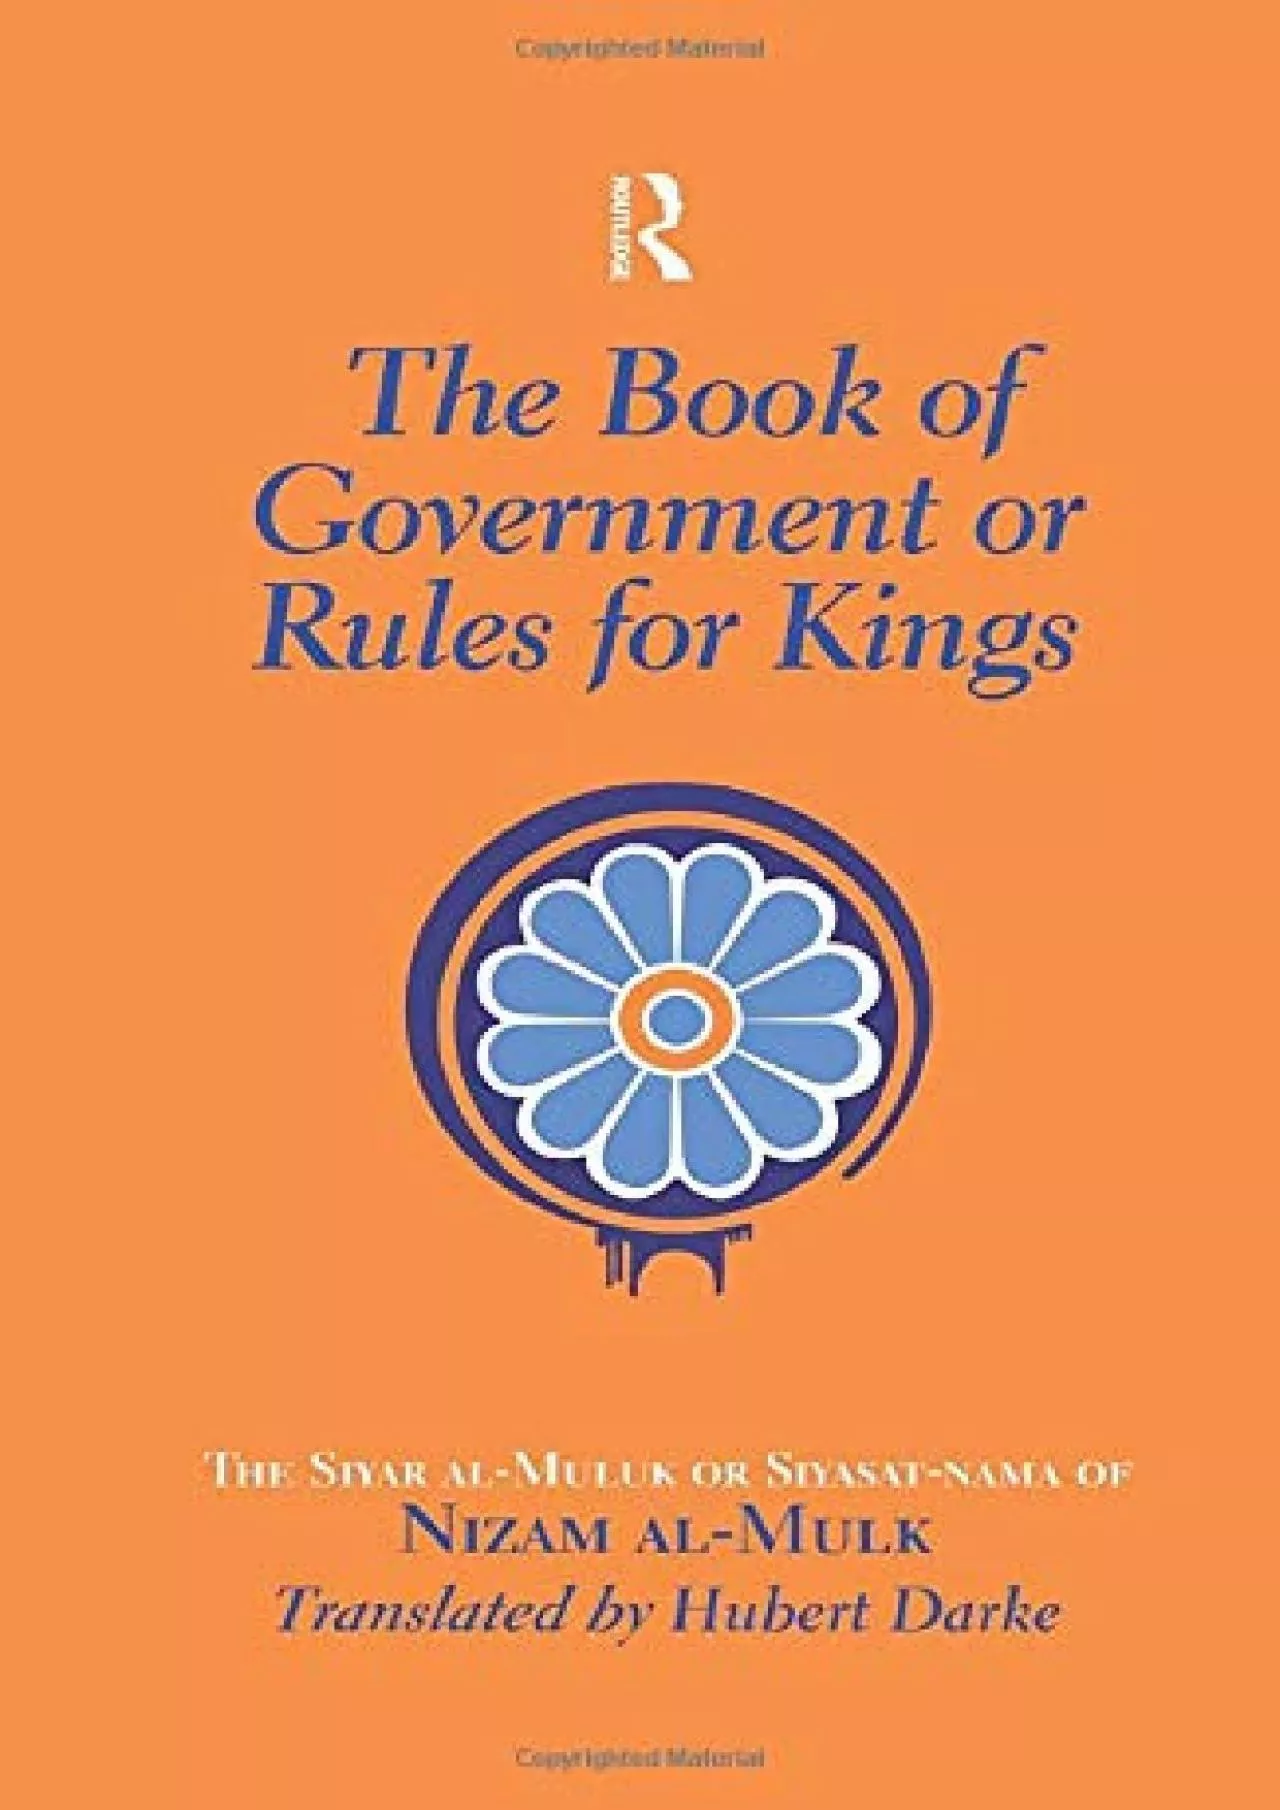 [DOWNLOAD]-The Book of Government or Rules for Kings: The Siyar al Muluk or Siyasat-nama